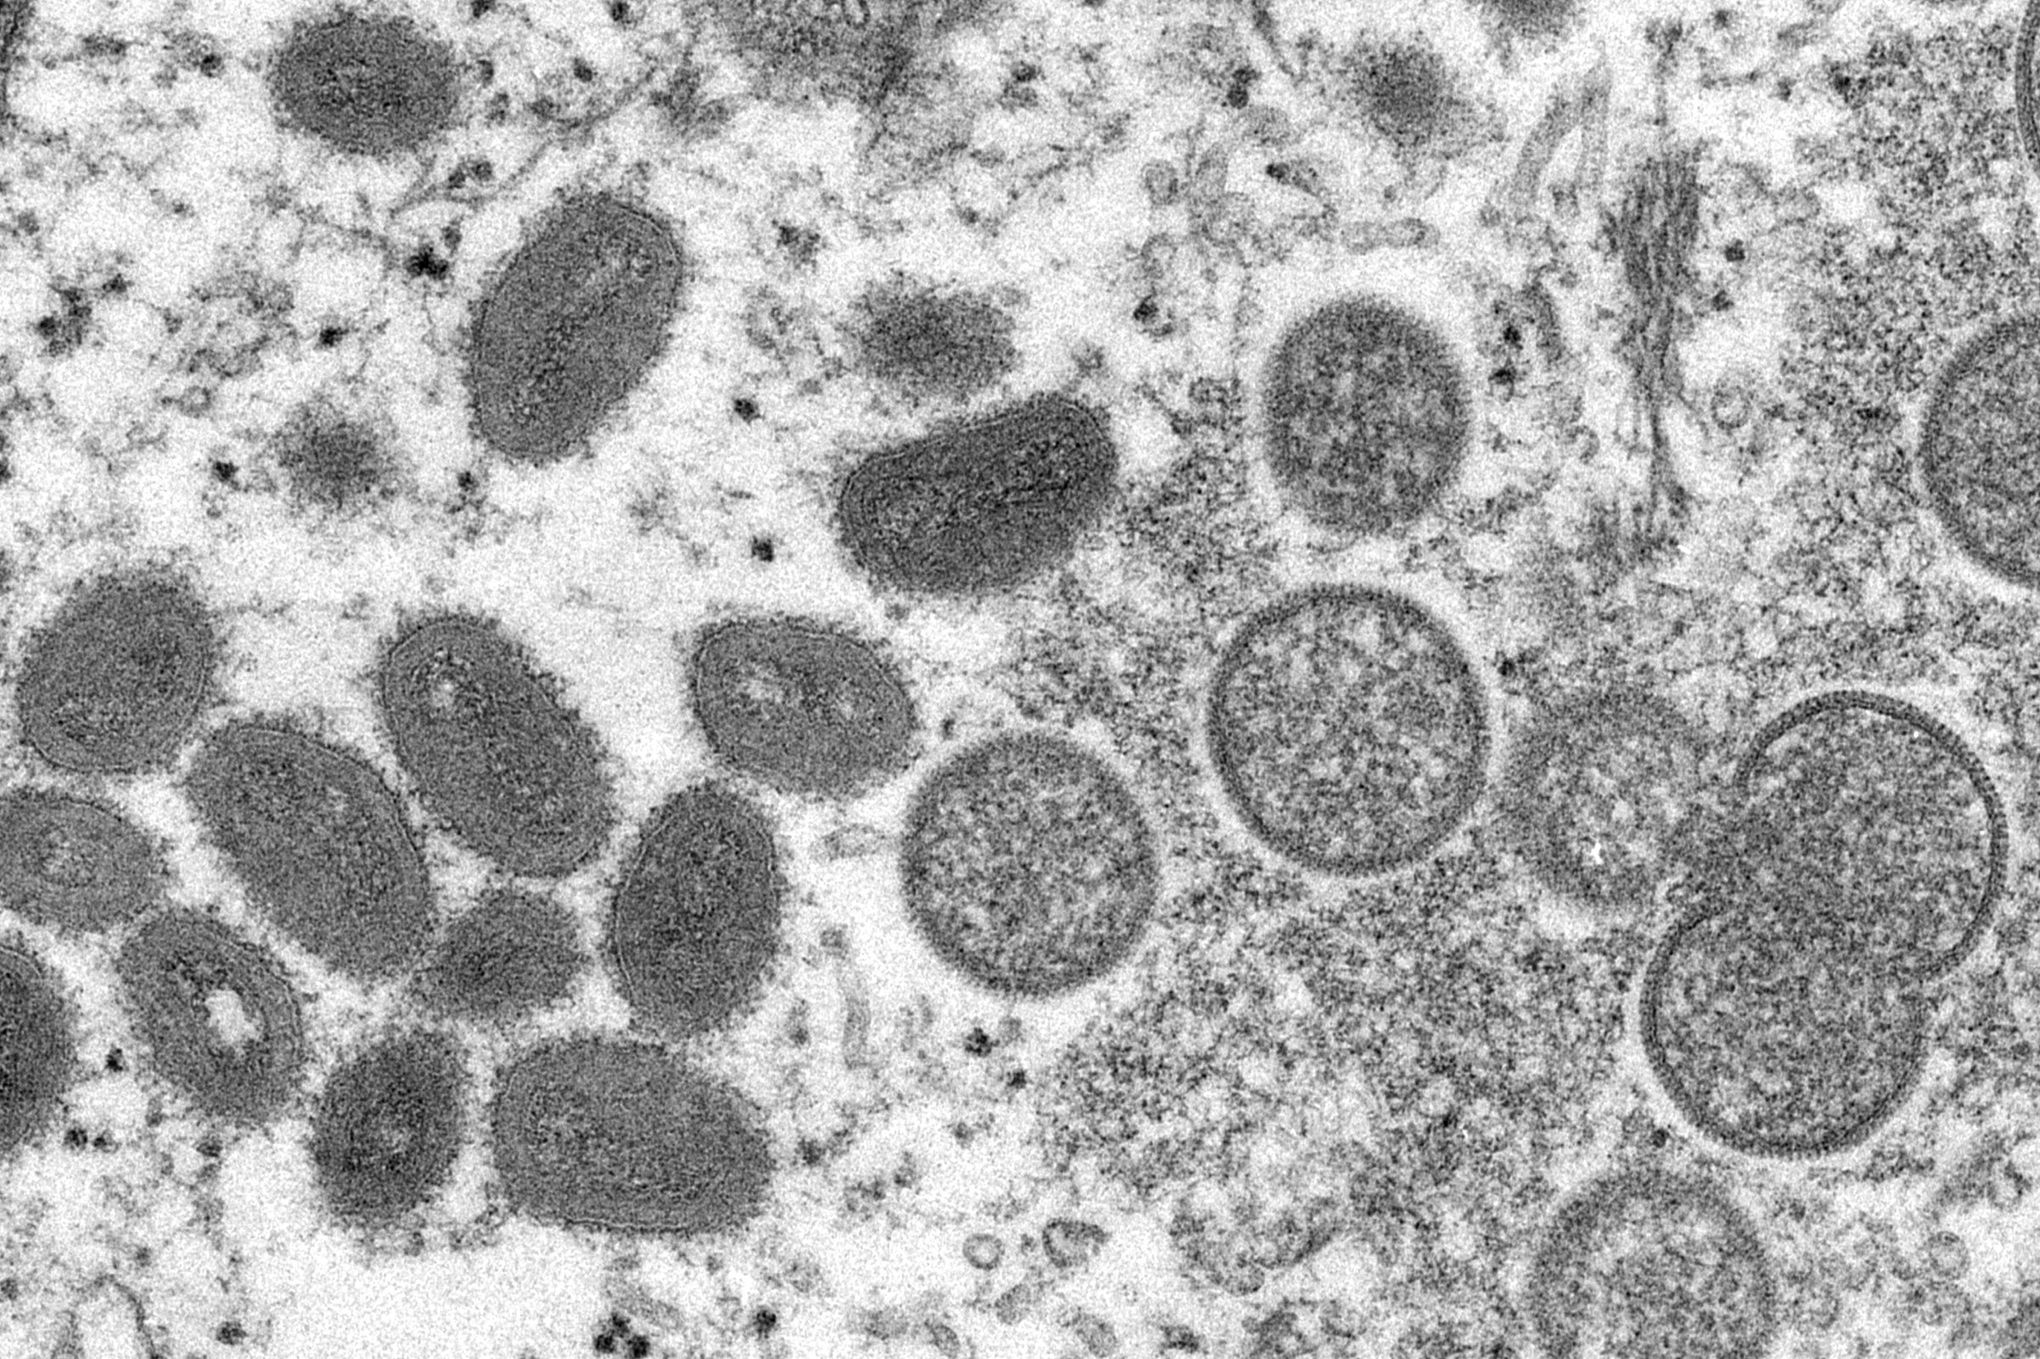 This electron microscope image shows mature, oval-shaped monkeypox virions, left, and spherical immature virions, right.